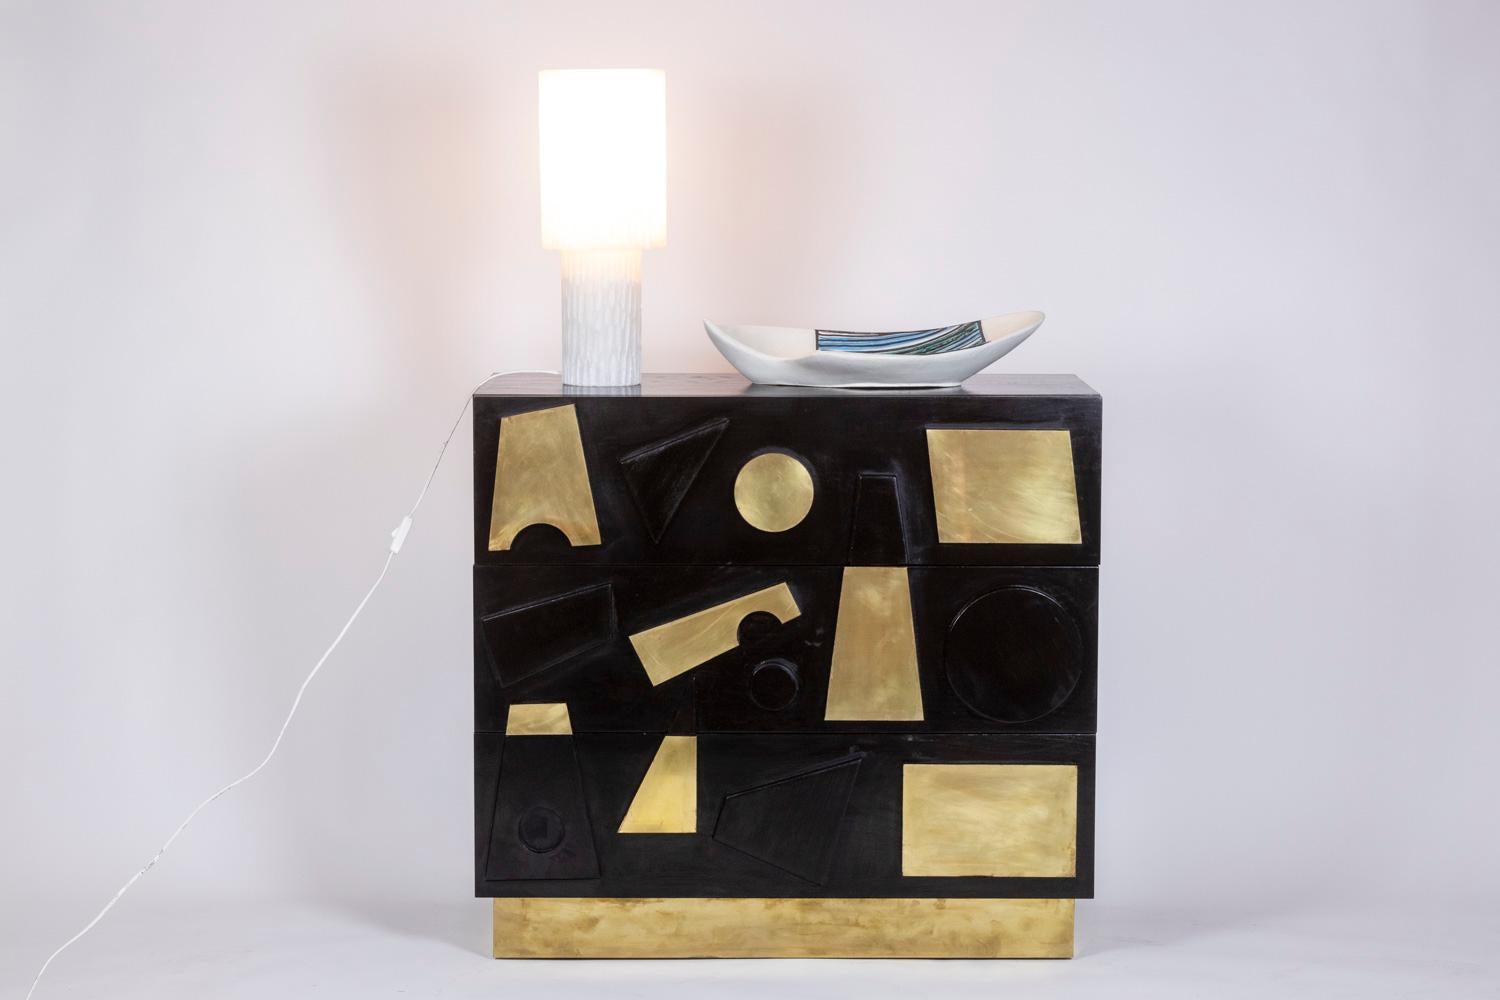 Pair of chests of drawers in a rectangular shape, each chest of drawers opening on the front with three drawers, in black lacquered beech decorated with geometric shapes, some in black lacquer and others in gilded brass. Base in gilded brass in a